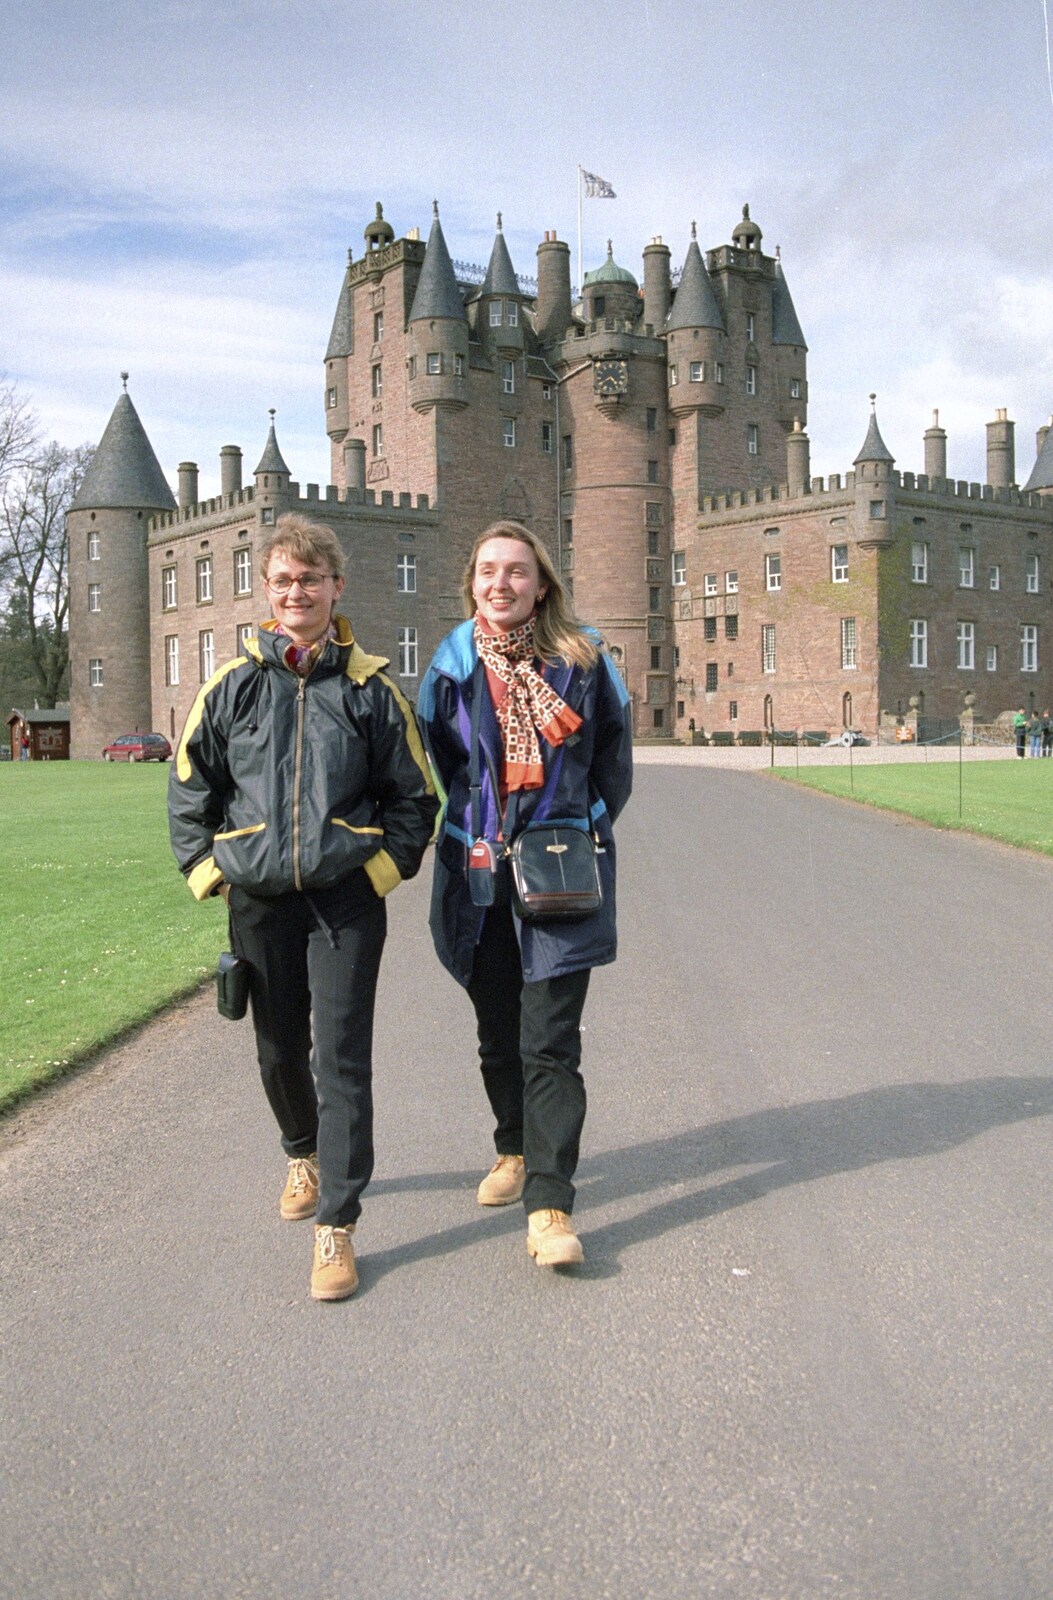 Isabelle and Carole at Glamis Castle from A Trip to Pitlochry, Scotland - 24th March 1998